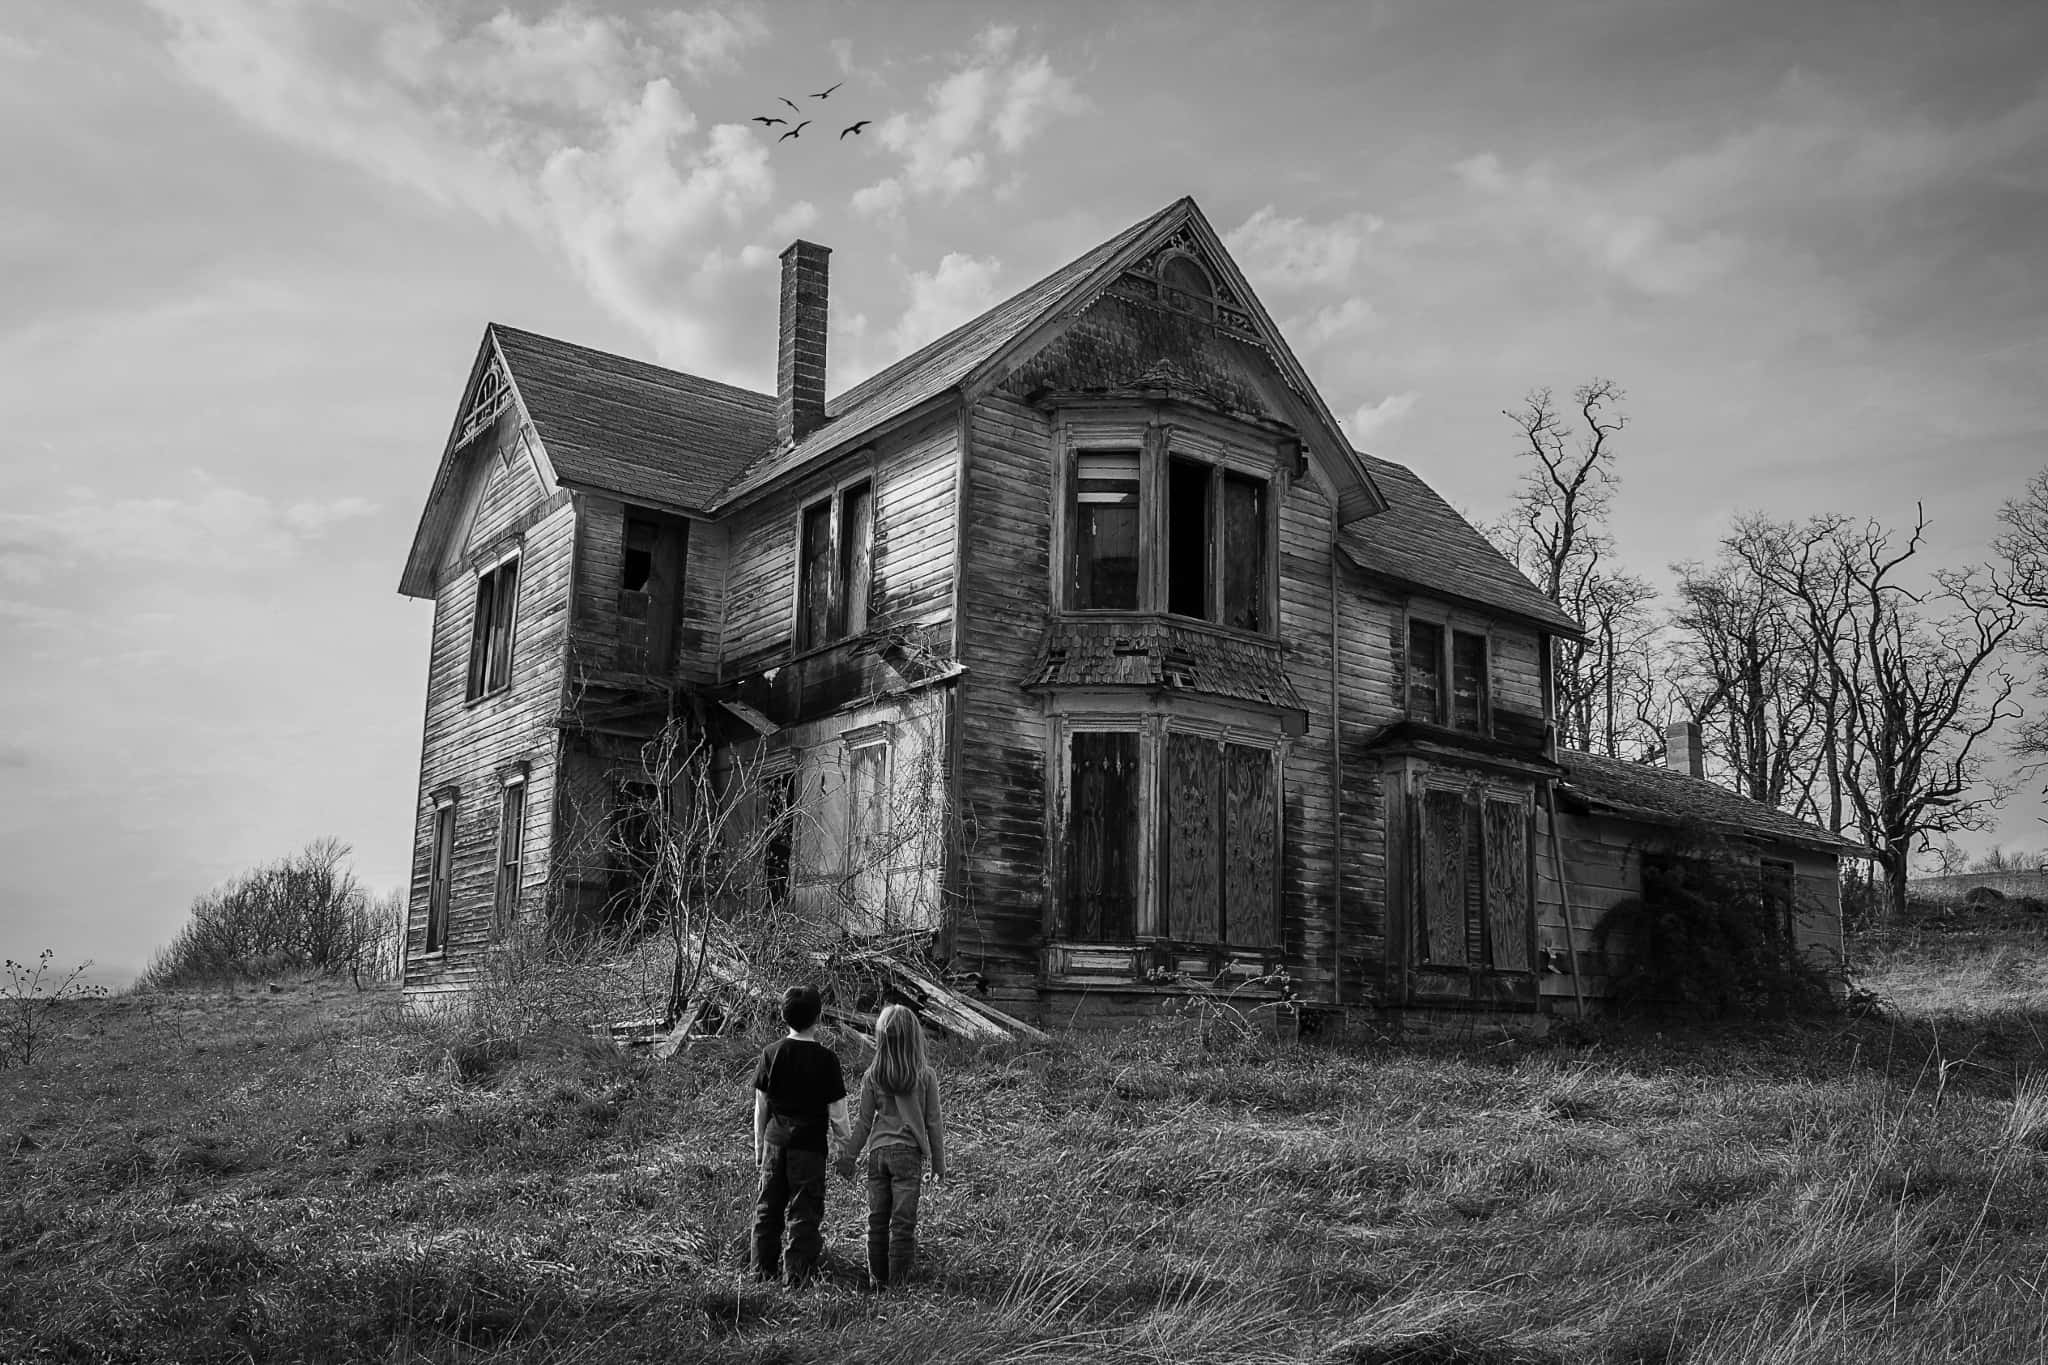 Explore the eerie mysteries of a haunted house